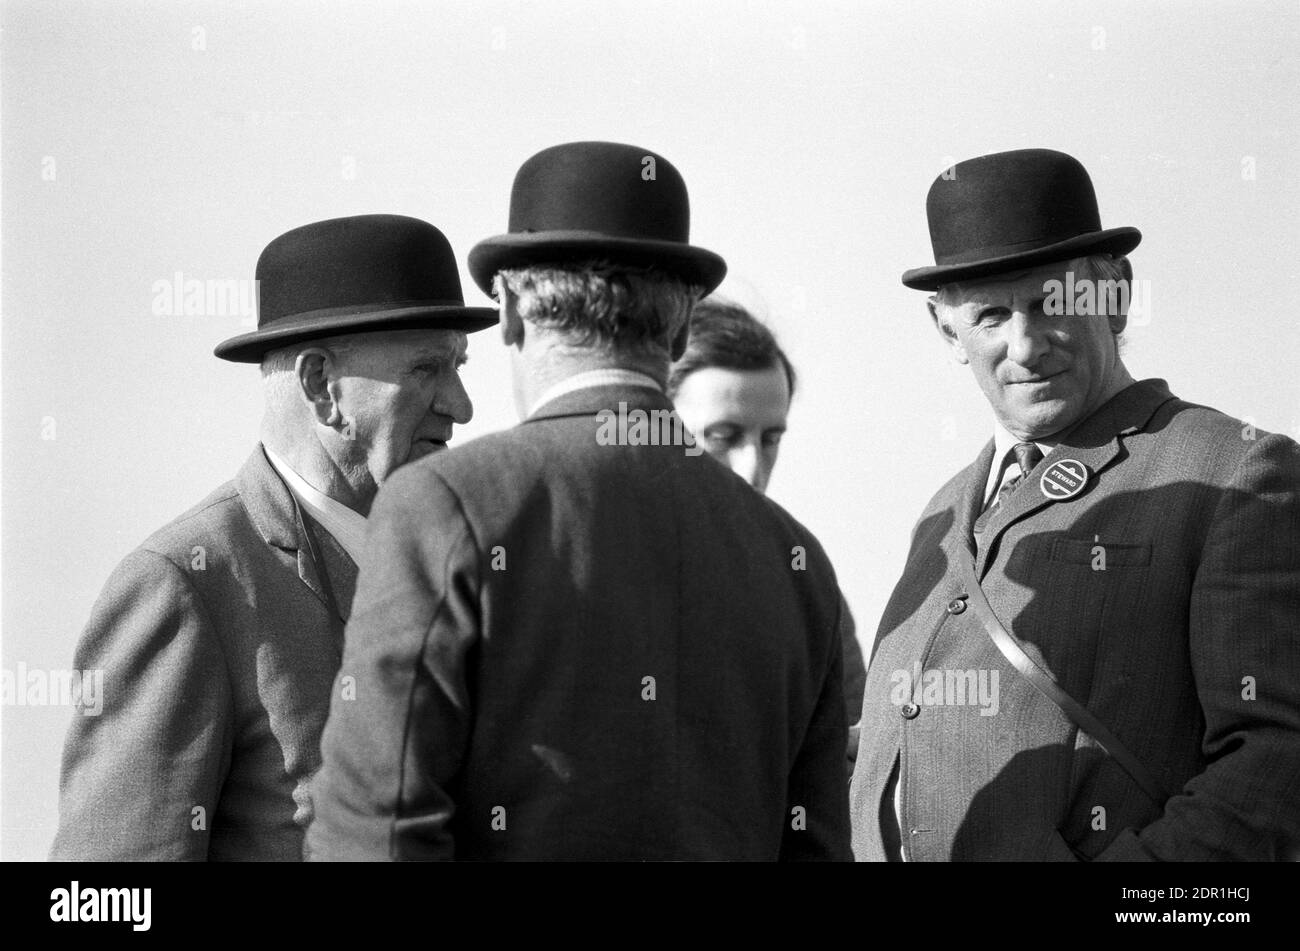 UK, England, Devonshire, Buckfastleigh, 1972. Point-to-Point horse races were held at  Dean Court on the Dean Marshes, close to the A38 between Plymouth and Exeter. Three stewards wearing black bowler hats. Stock Photo